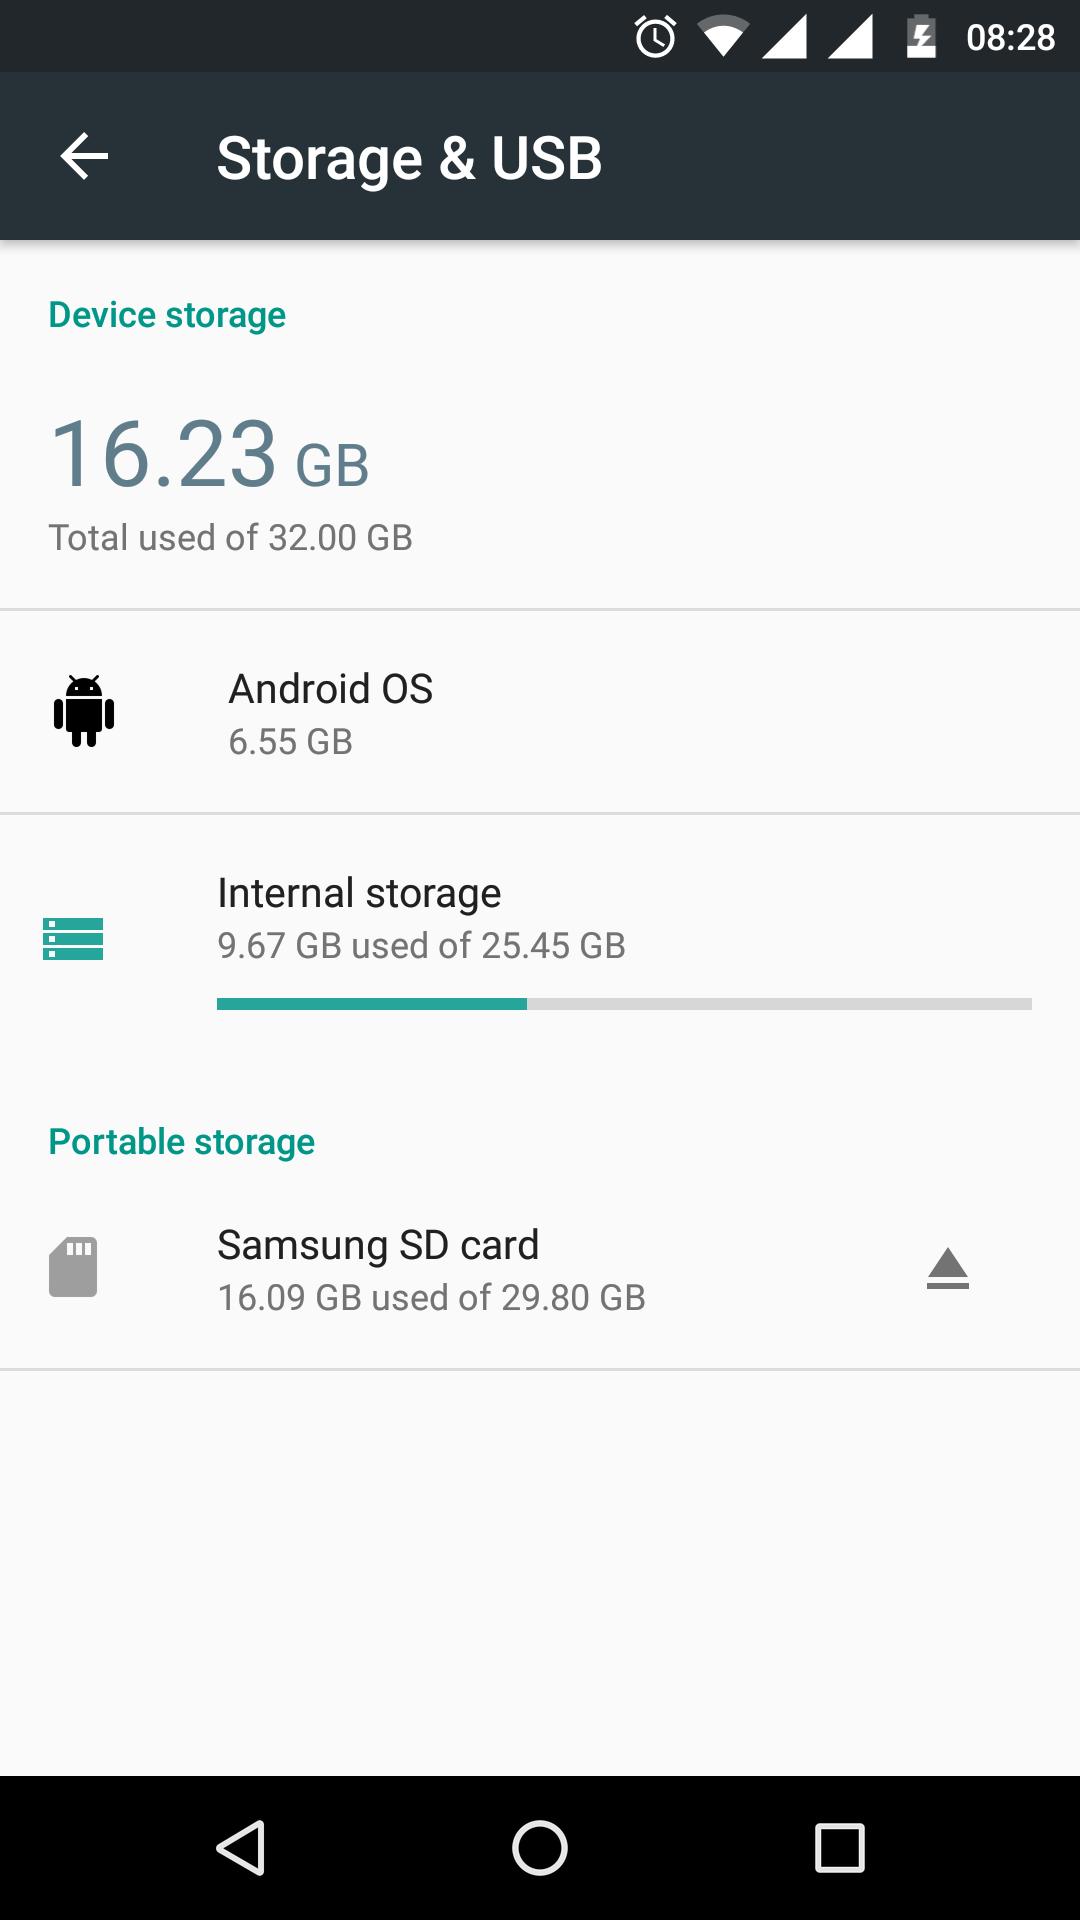 How to use adoptable storage on Android 6.0 Marshmallow